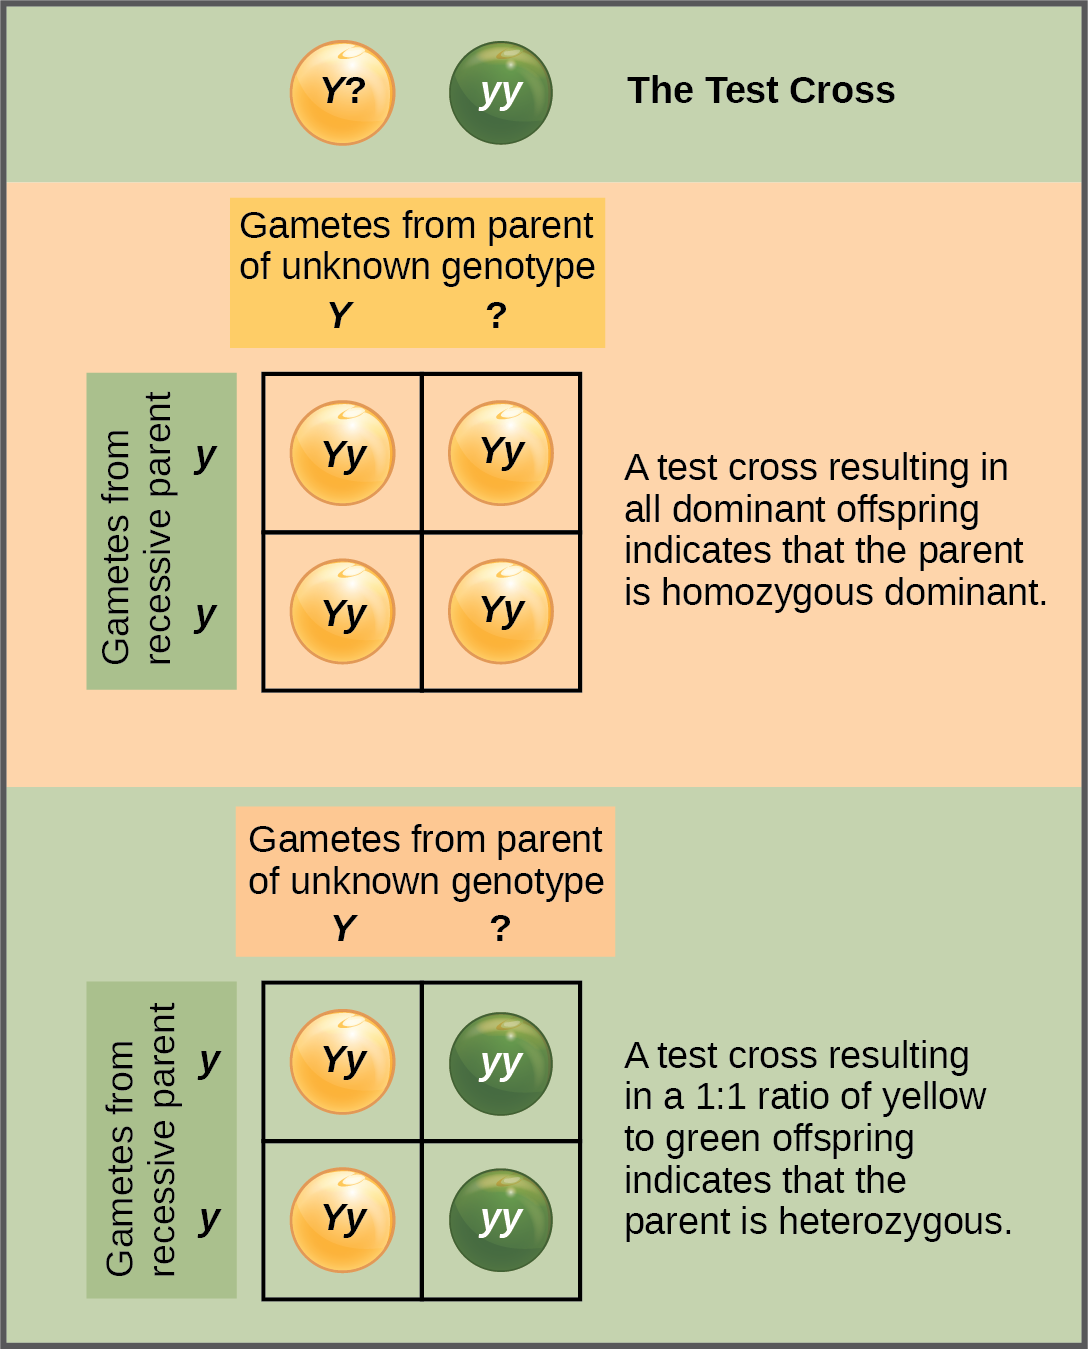 In a test cross, a parent with a dominant phenotype but unknown genotype is crossed with a recessive parent. If the parent with the unknown phenotype is homozygous dominant, all of the resulting offspring will have at least one dominant allele. If the parent with the unknown phenotype is heterozygous, fifty percent of the offspring will inherit a recessive allele from both parents and will have the recessive phenotype.